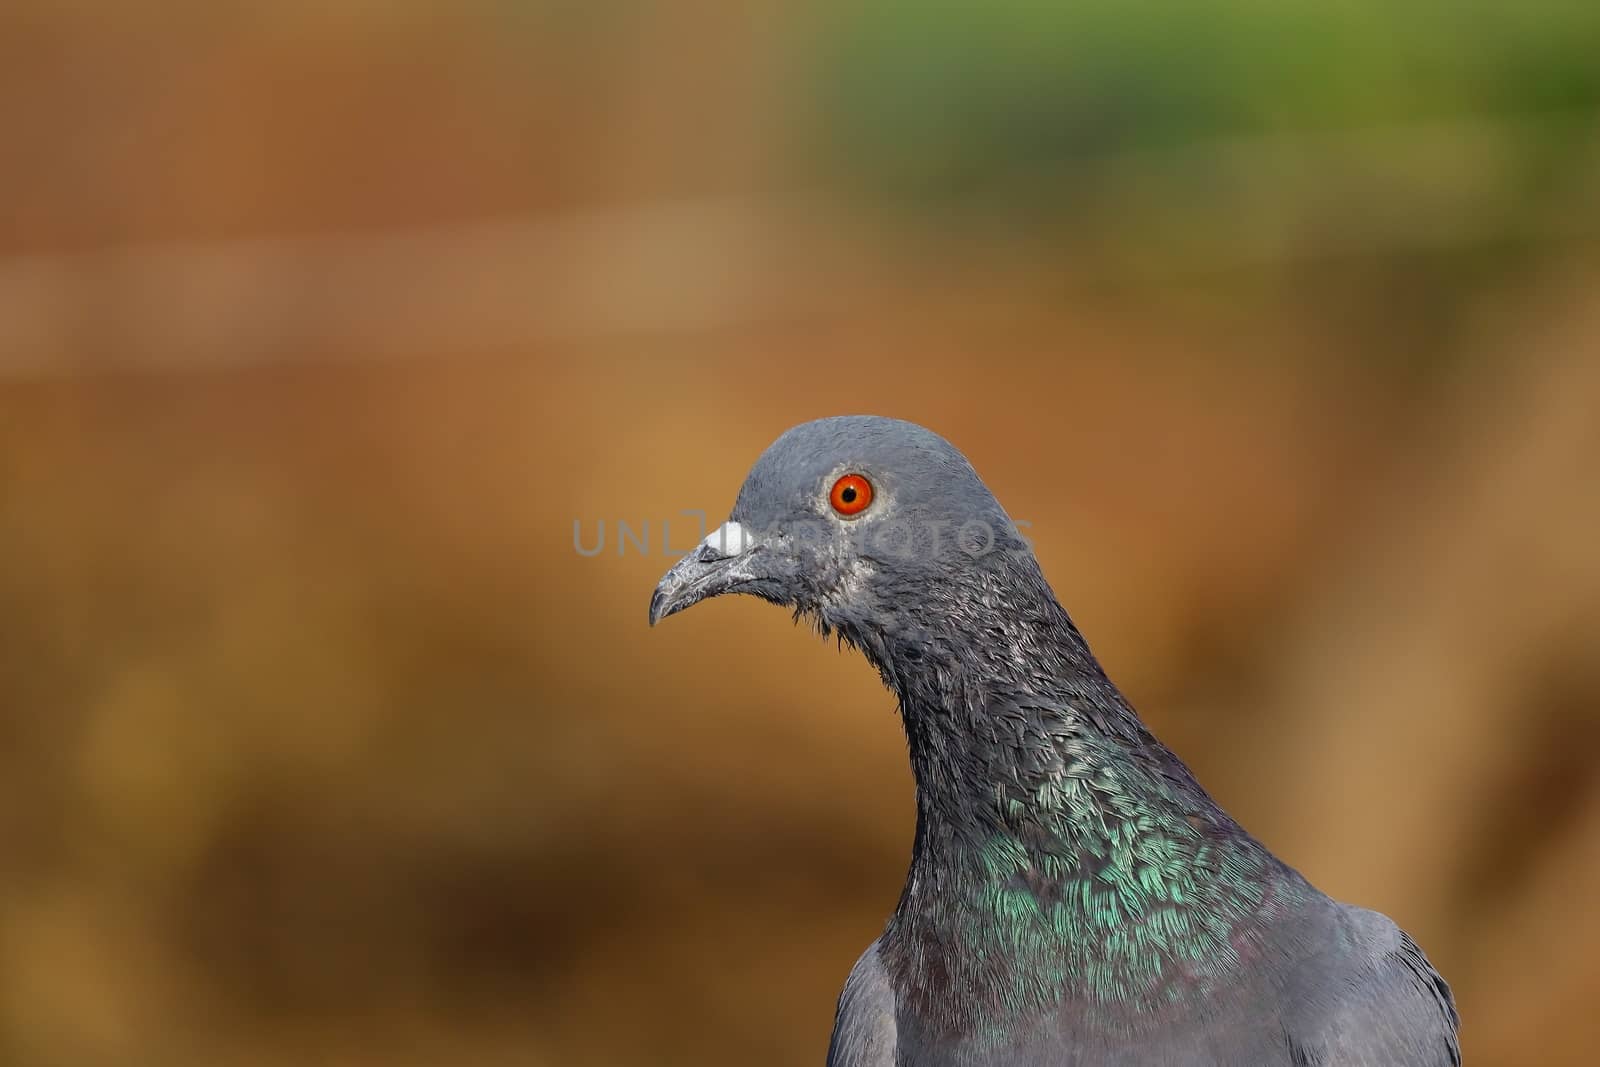 bird hd image, front view portrait of rock pigeon photography